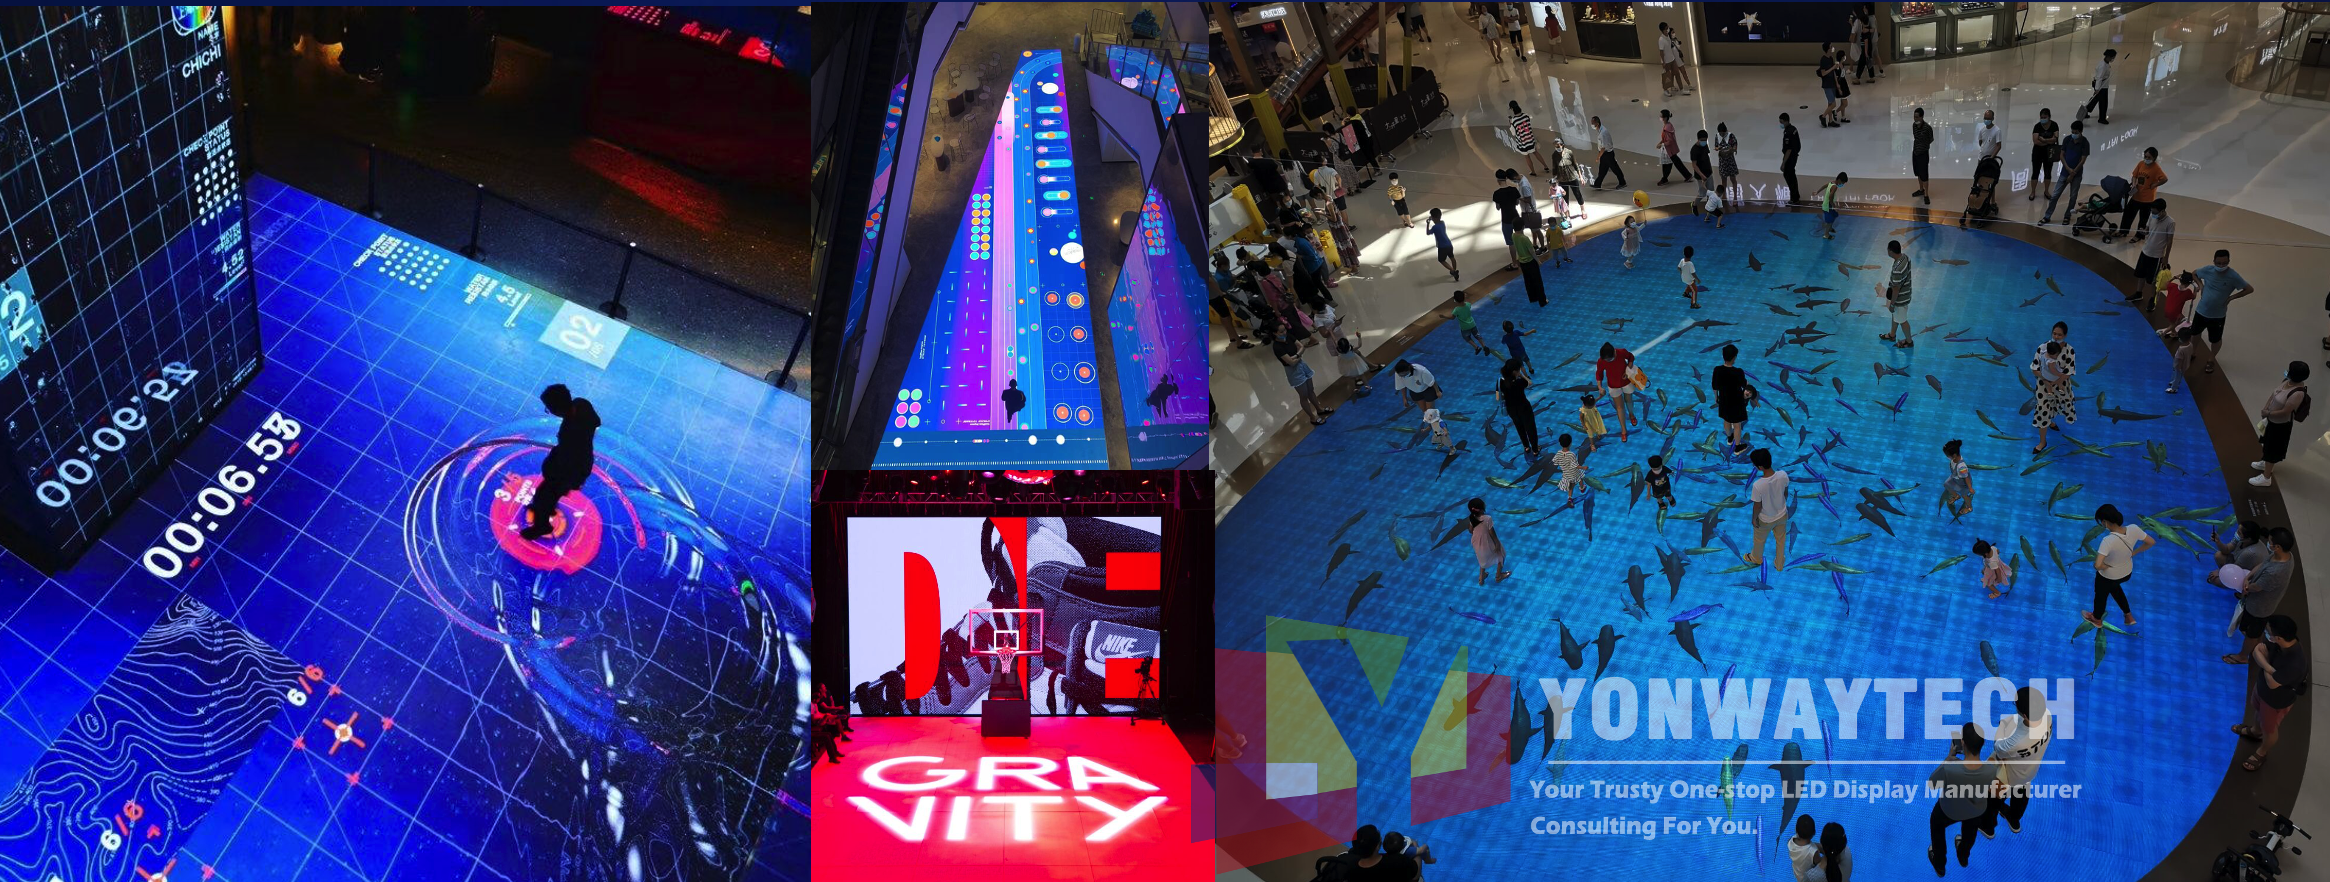 shopping mall dance floor led display interaction video wall center